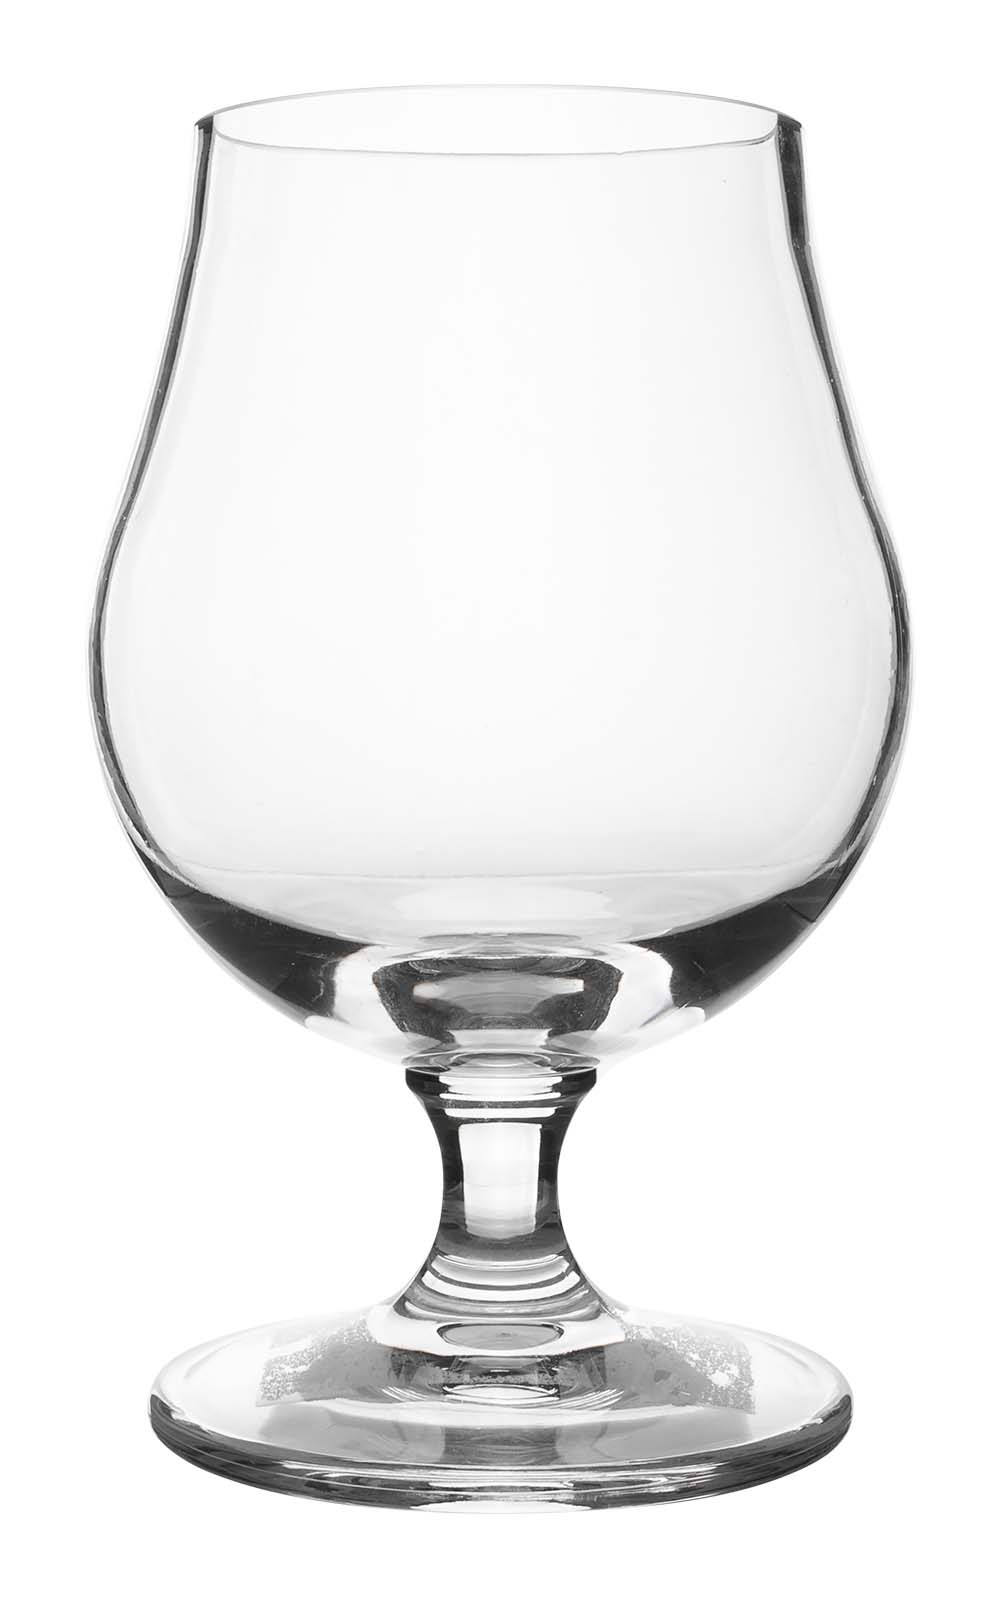 6101415 An elegant beer glass constructed from plastic, providing scratch resistance and a featherlight quality. Additionally, it can be safely cleaned in the dishwasher and is free from BPA.